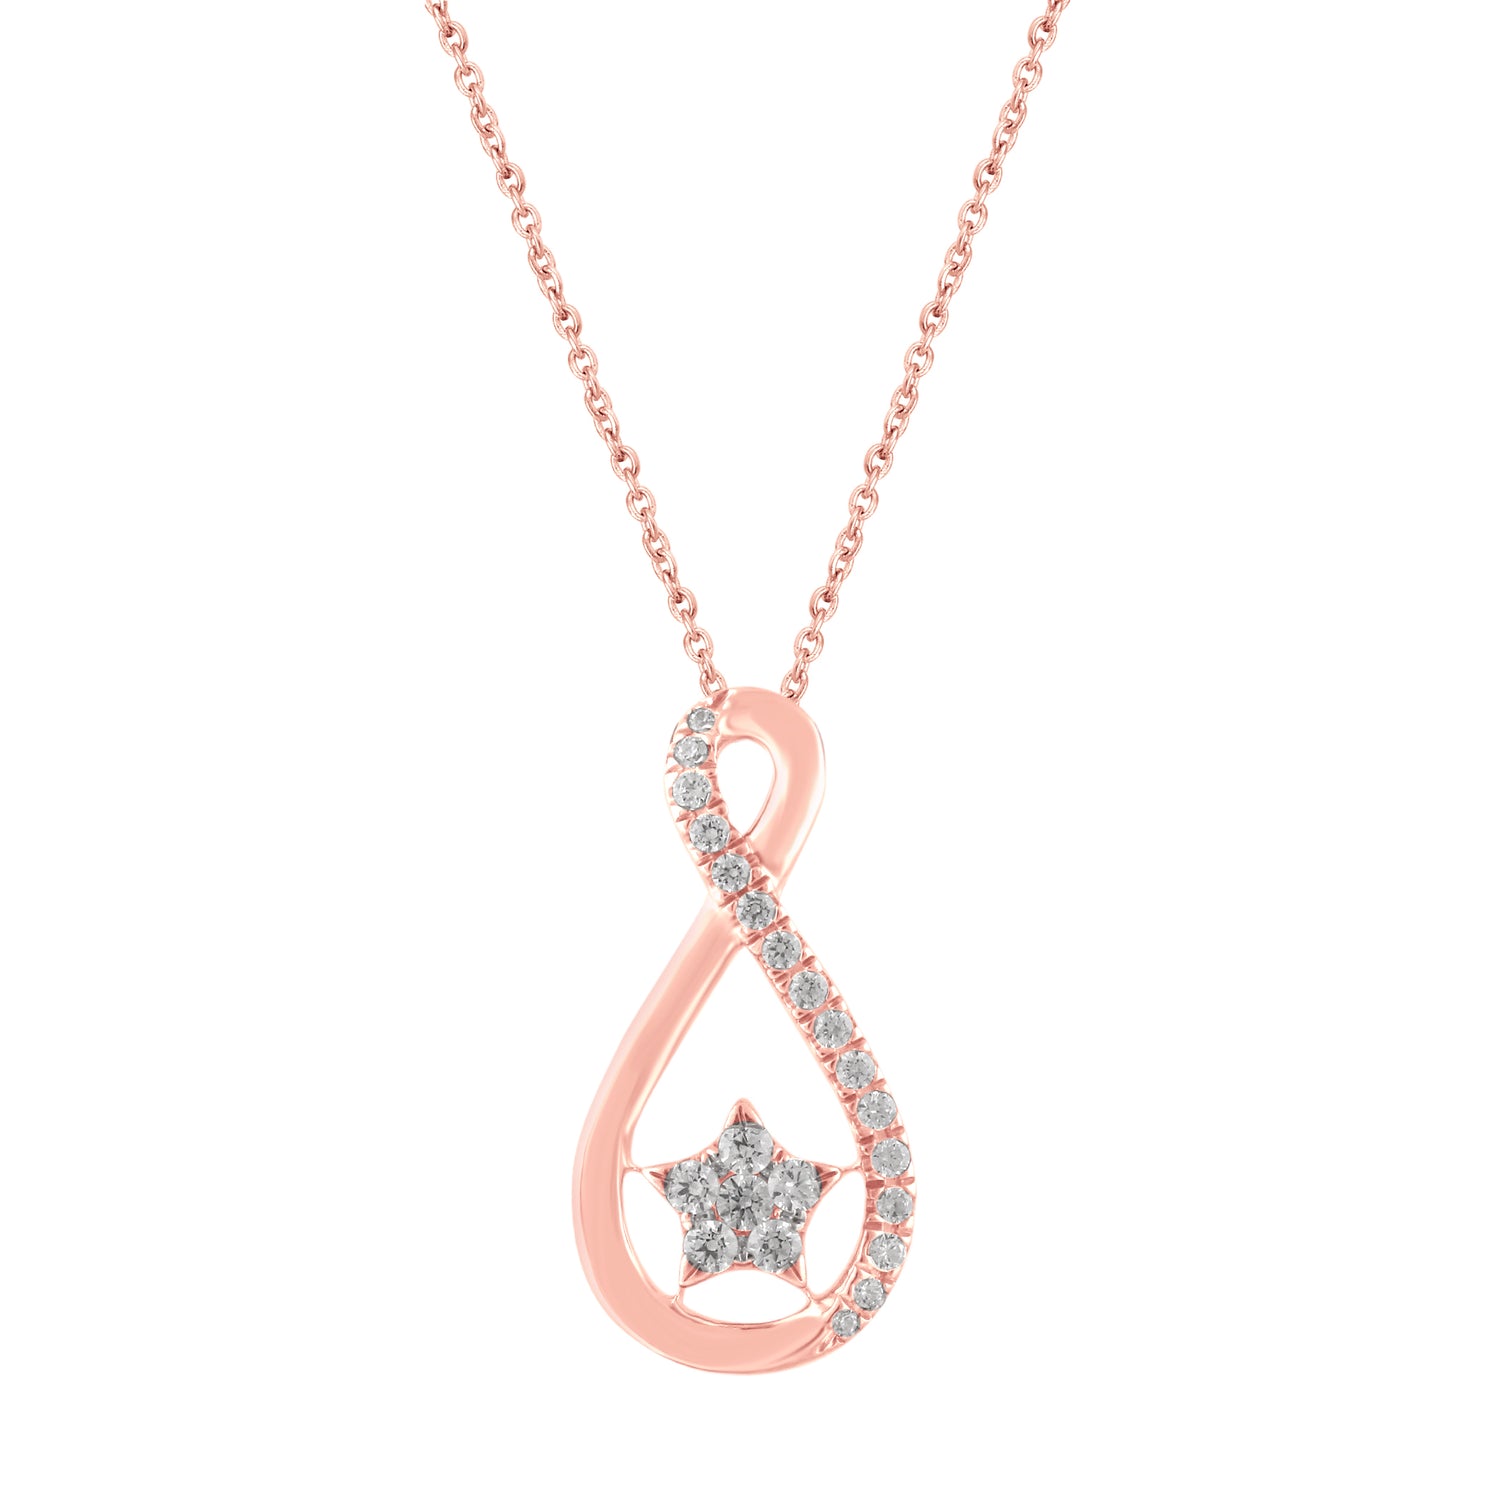 1/5 CT TW Diamond Infinity Floating Star Pendant Necklace in 925 Sterling Silver in Rose Gold